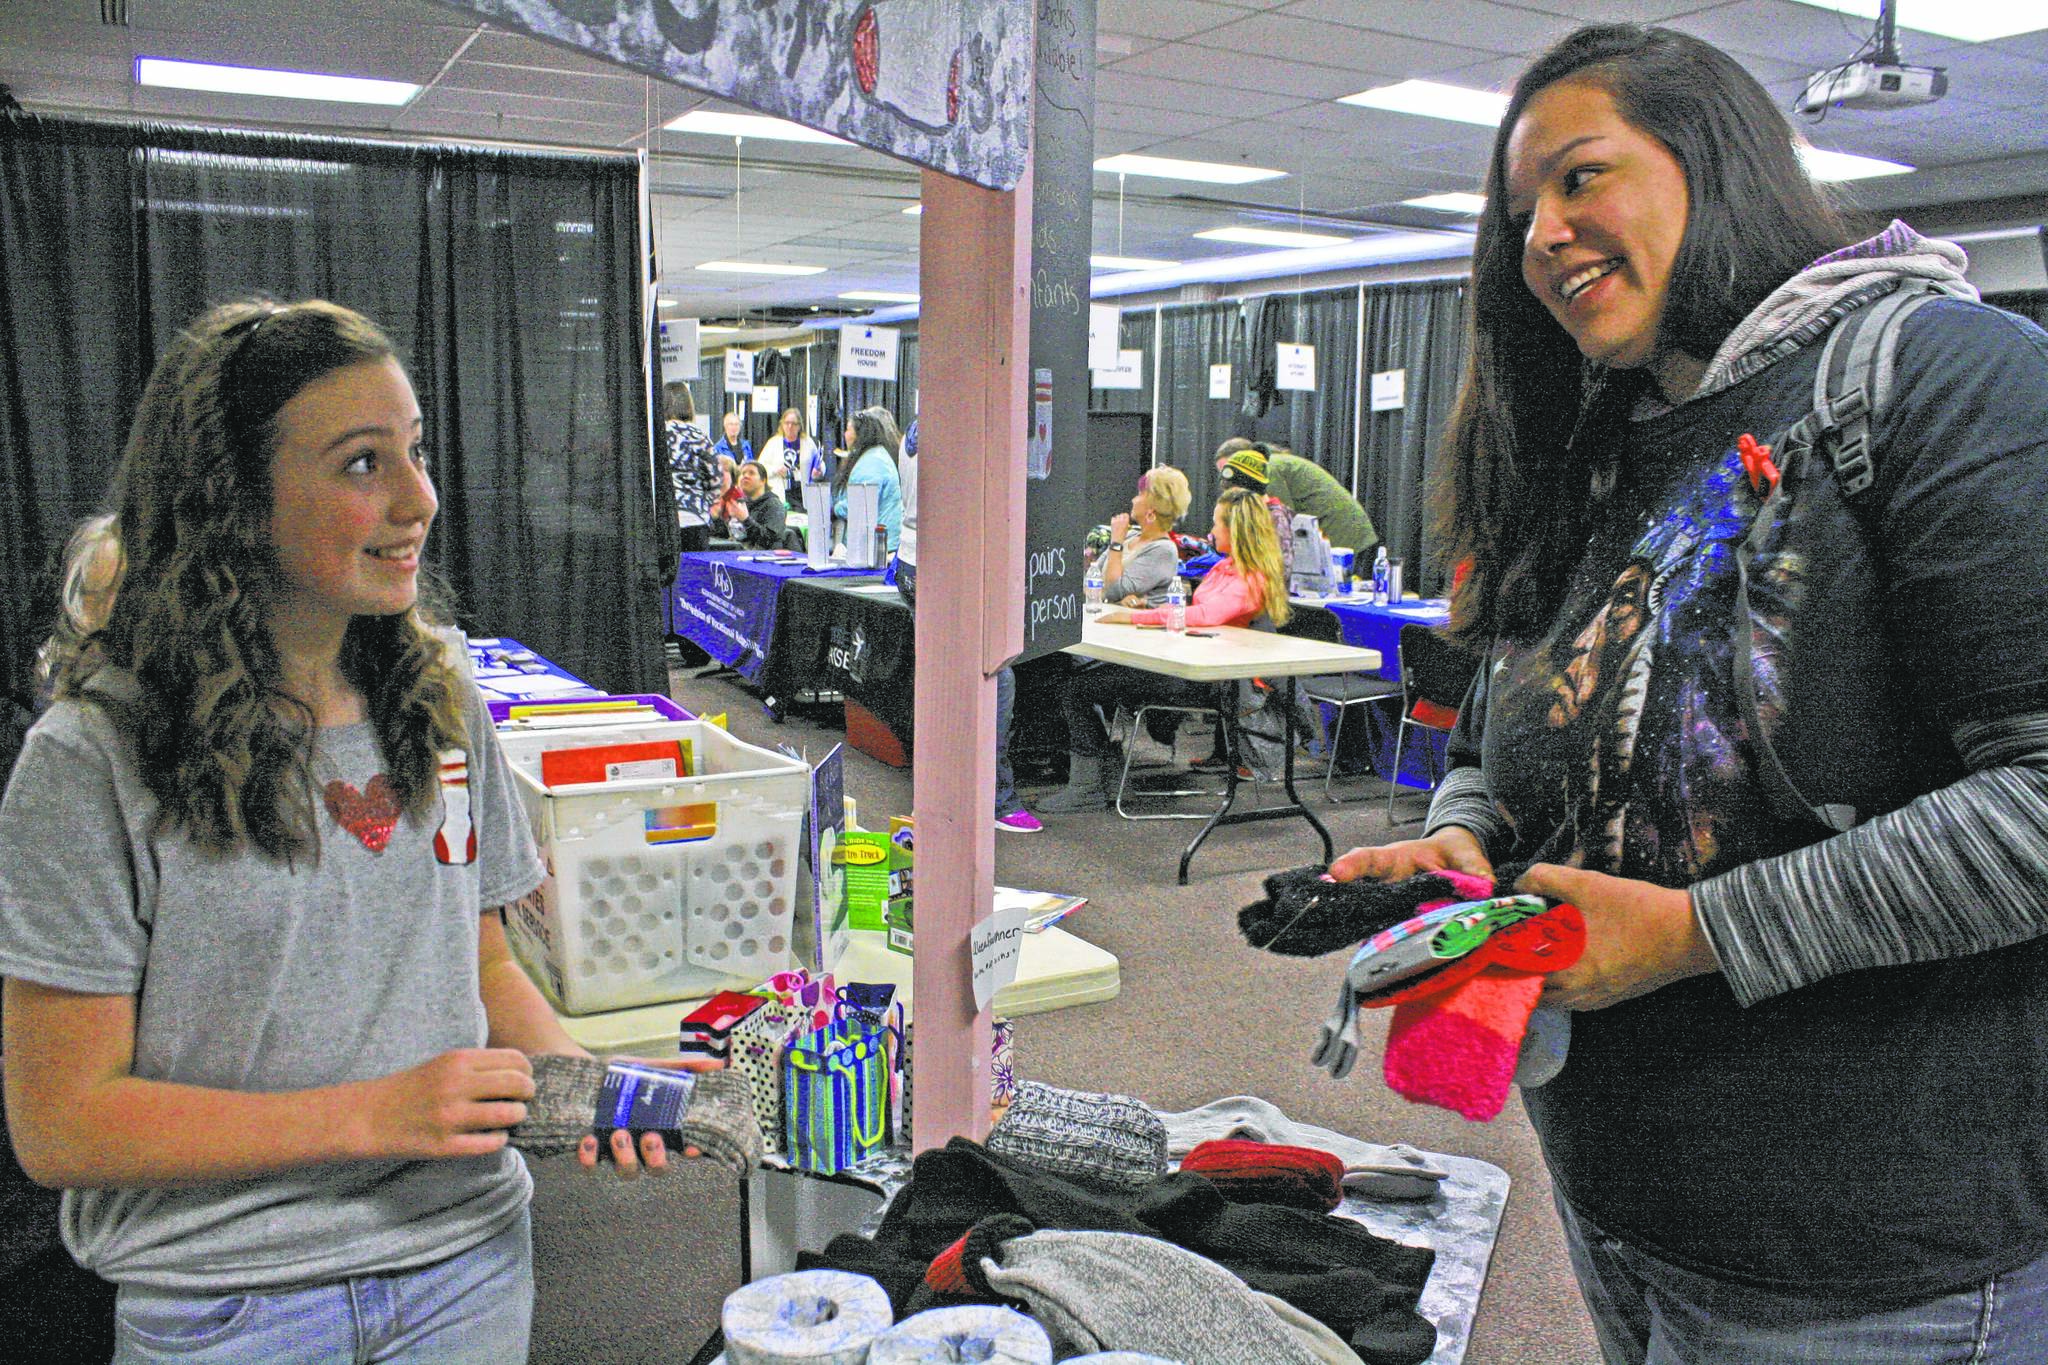 Aleea Faulkner, 12, shares socks with mom Wausaumoutouikwe Sandman-Shelifoe on Wednesday, Jan. 24, 2018, during Project Homeless Connect at the Soldotna Sports Complex. Faulkner spearheaded a sock drive to support the annual community service event. (Photo by Erin Thompson/Peninsula Clarion)